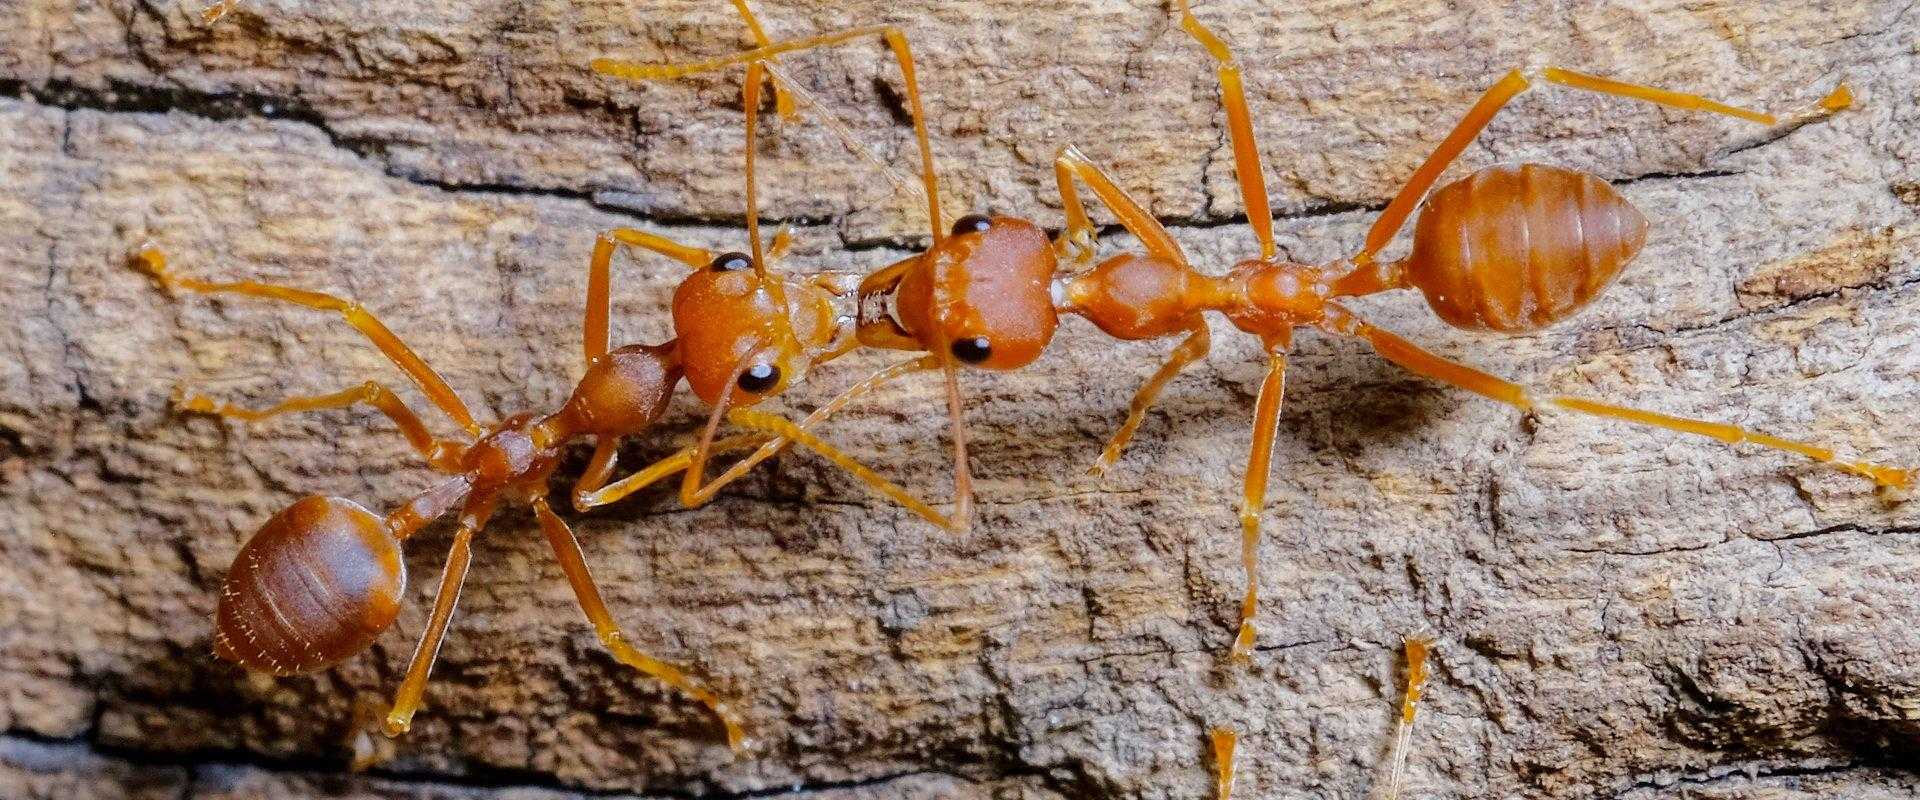 fire ants on wood in south florida